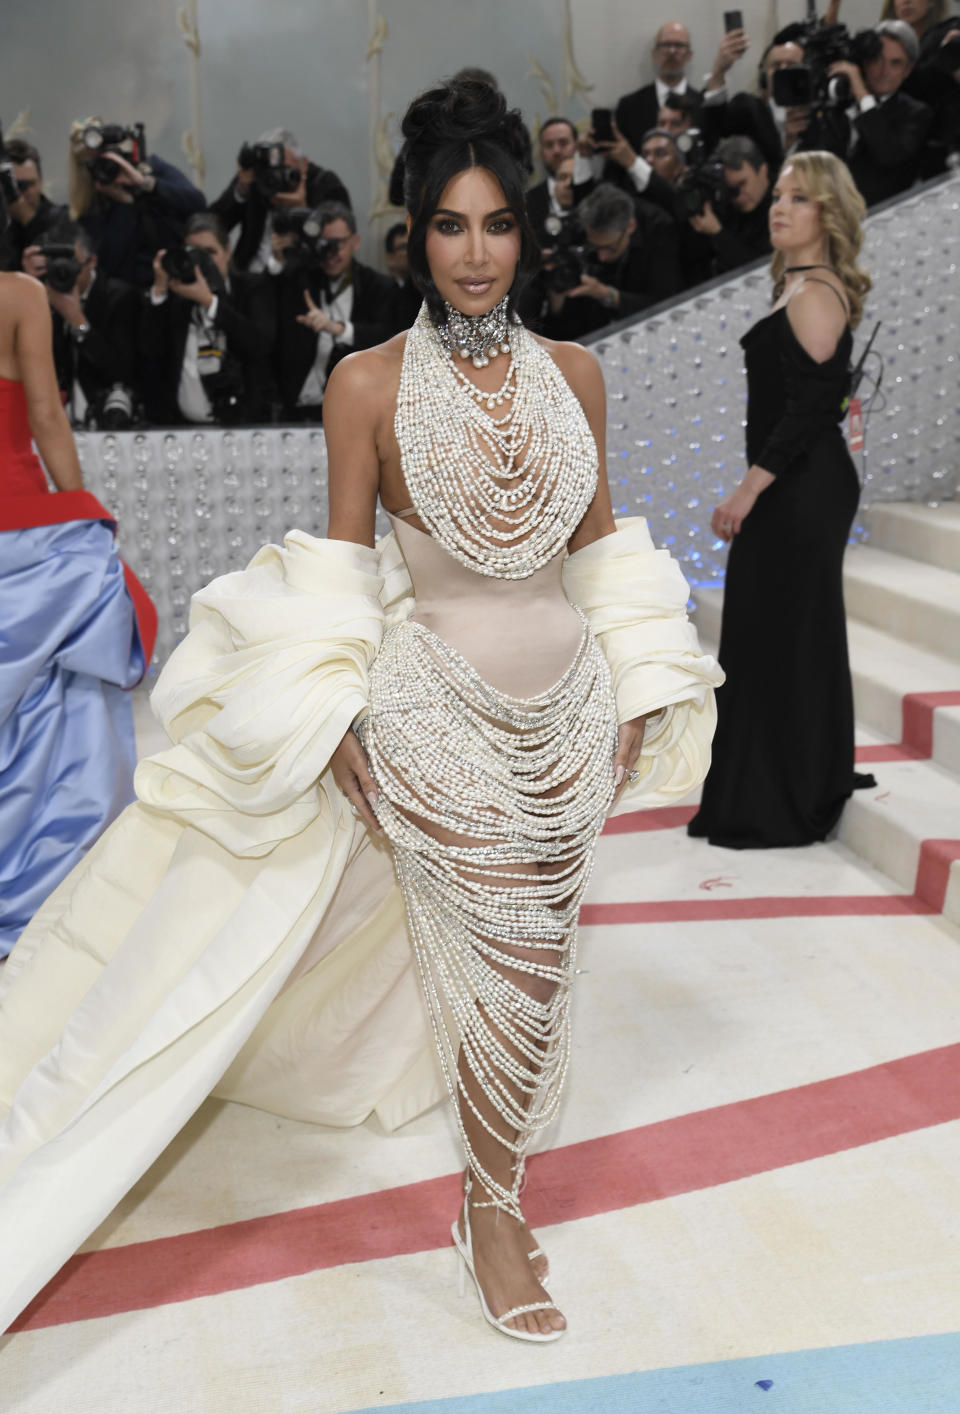 Kim Kardashian attends The Metropolitan Museum of Art's Costume Institute benefit gala celebrating the opening of the 